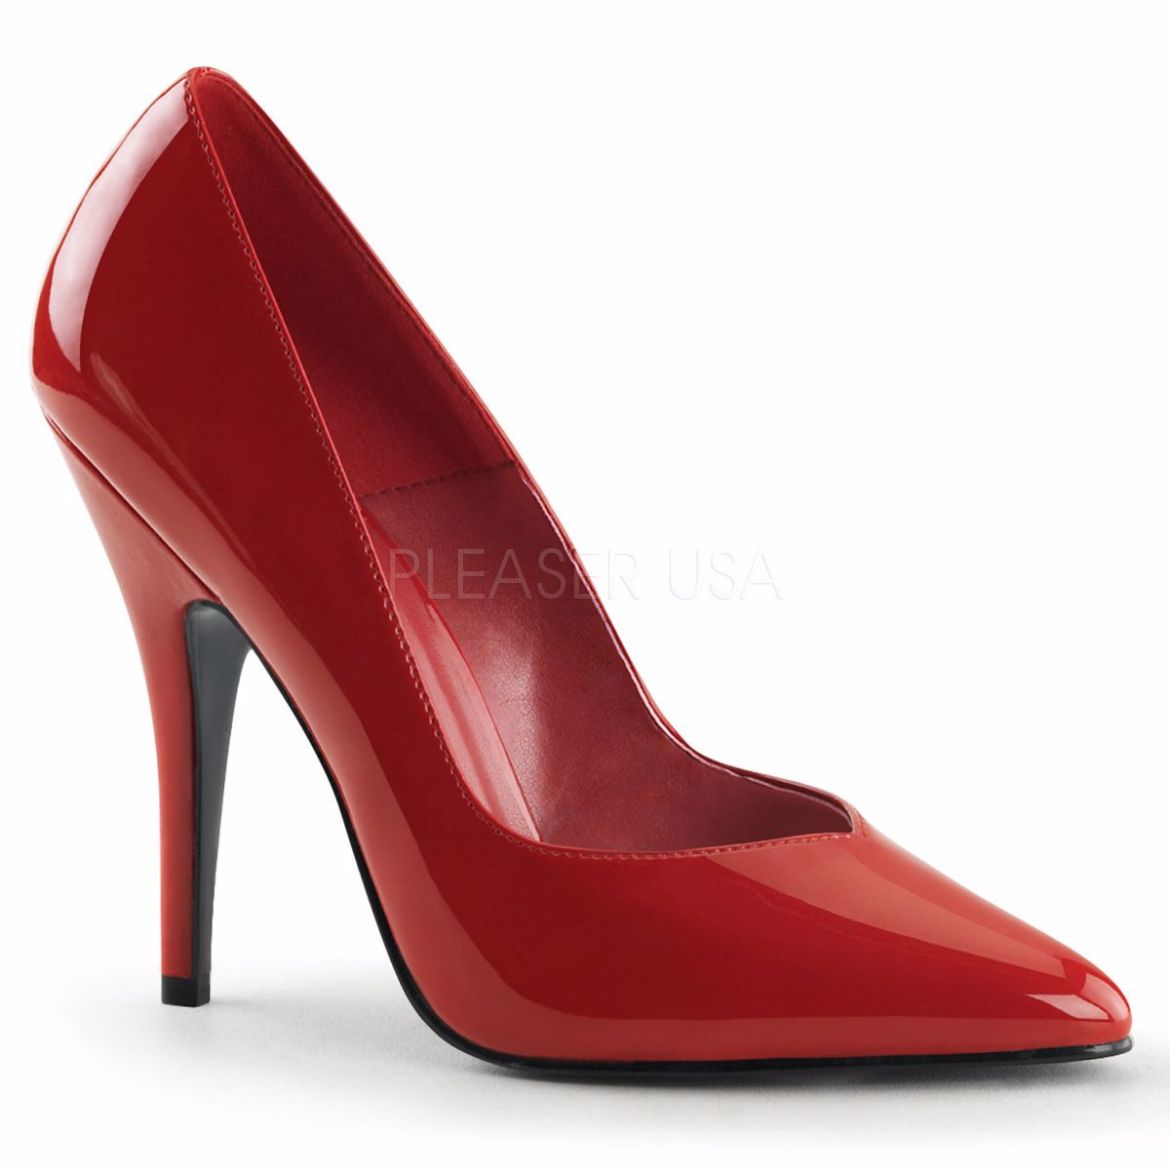 Product image of Pleaser Seduce-420V Red Patent, 5 inch (12.7 cm) Heel Court Pump Shoes